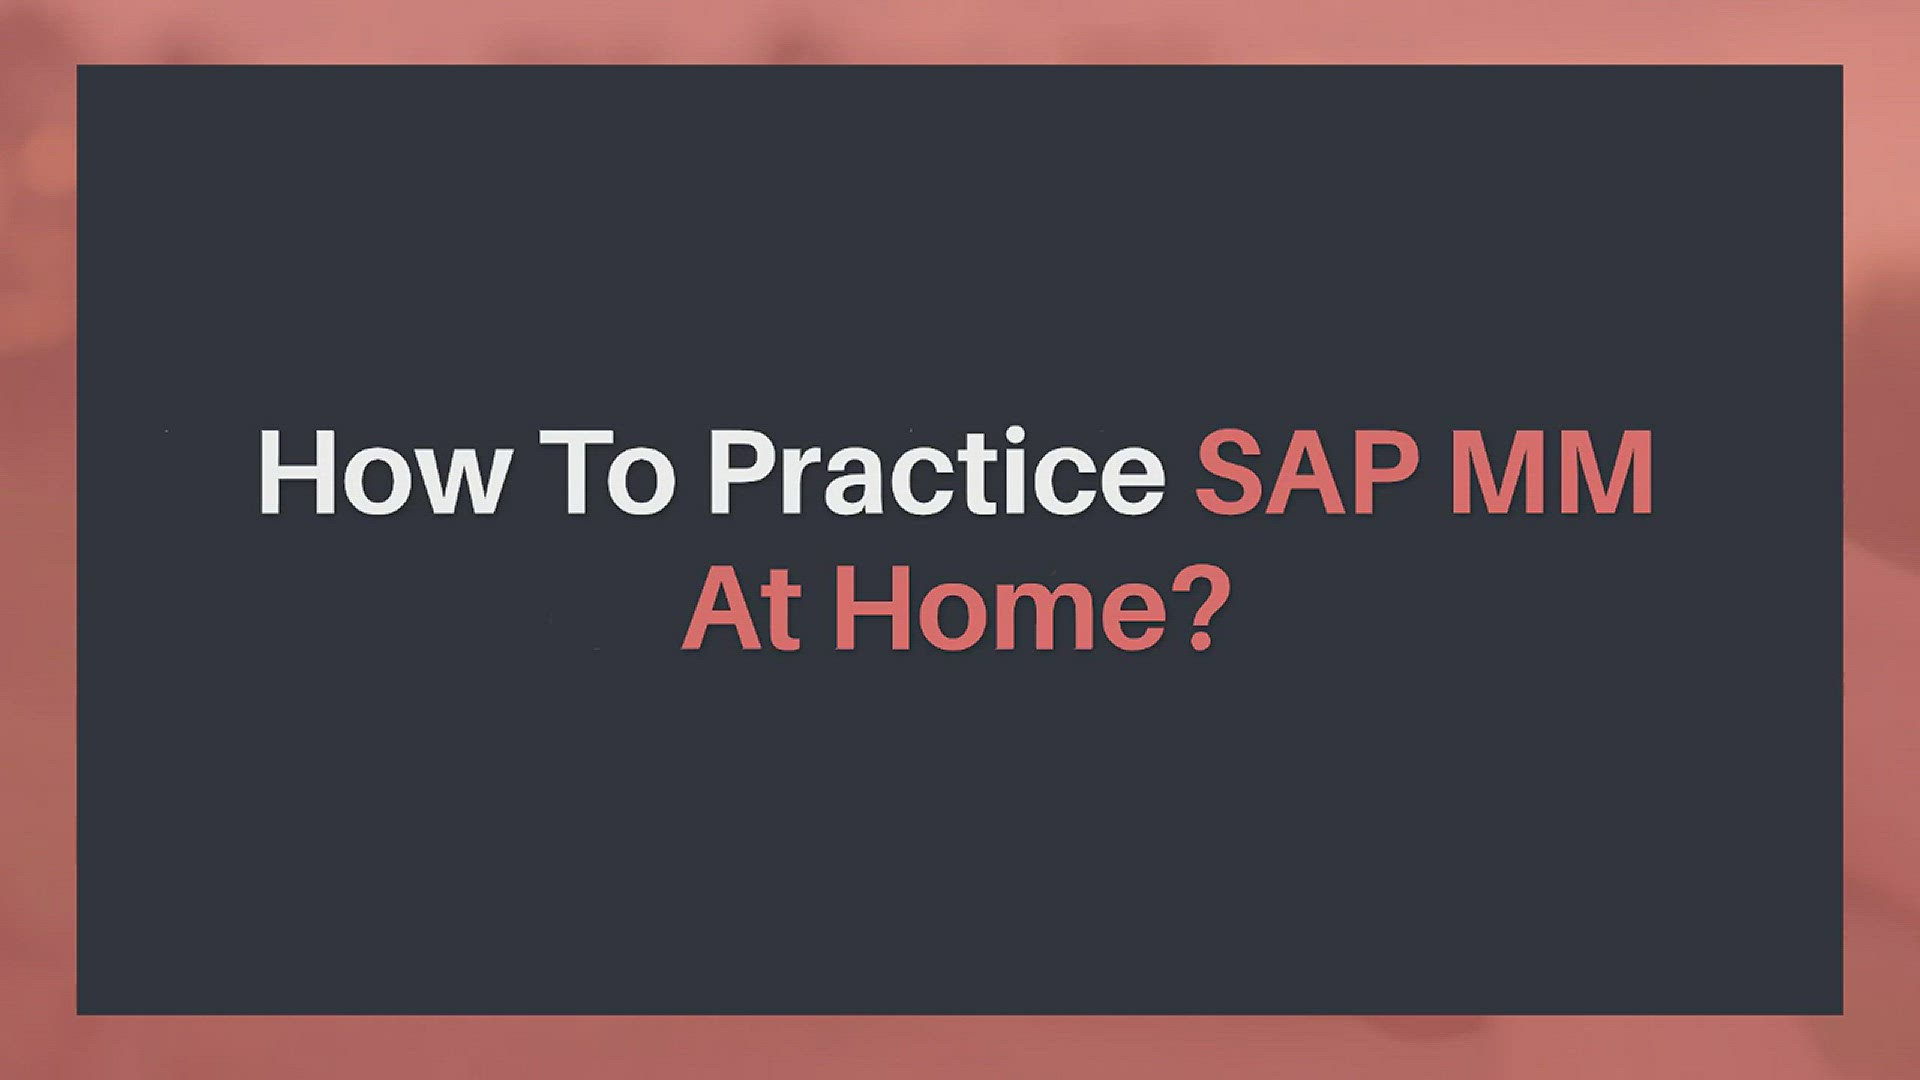 'Video thumbnail for How To Practice SAP MM At Home?'